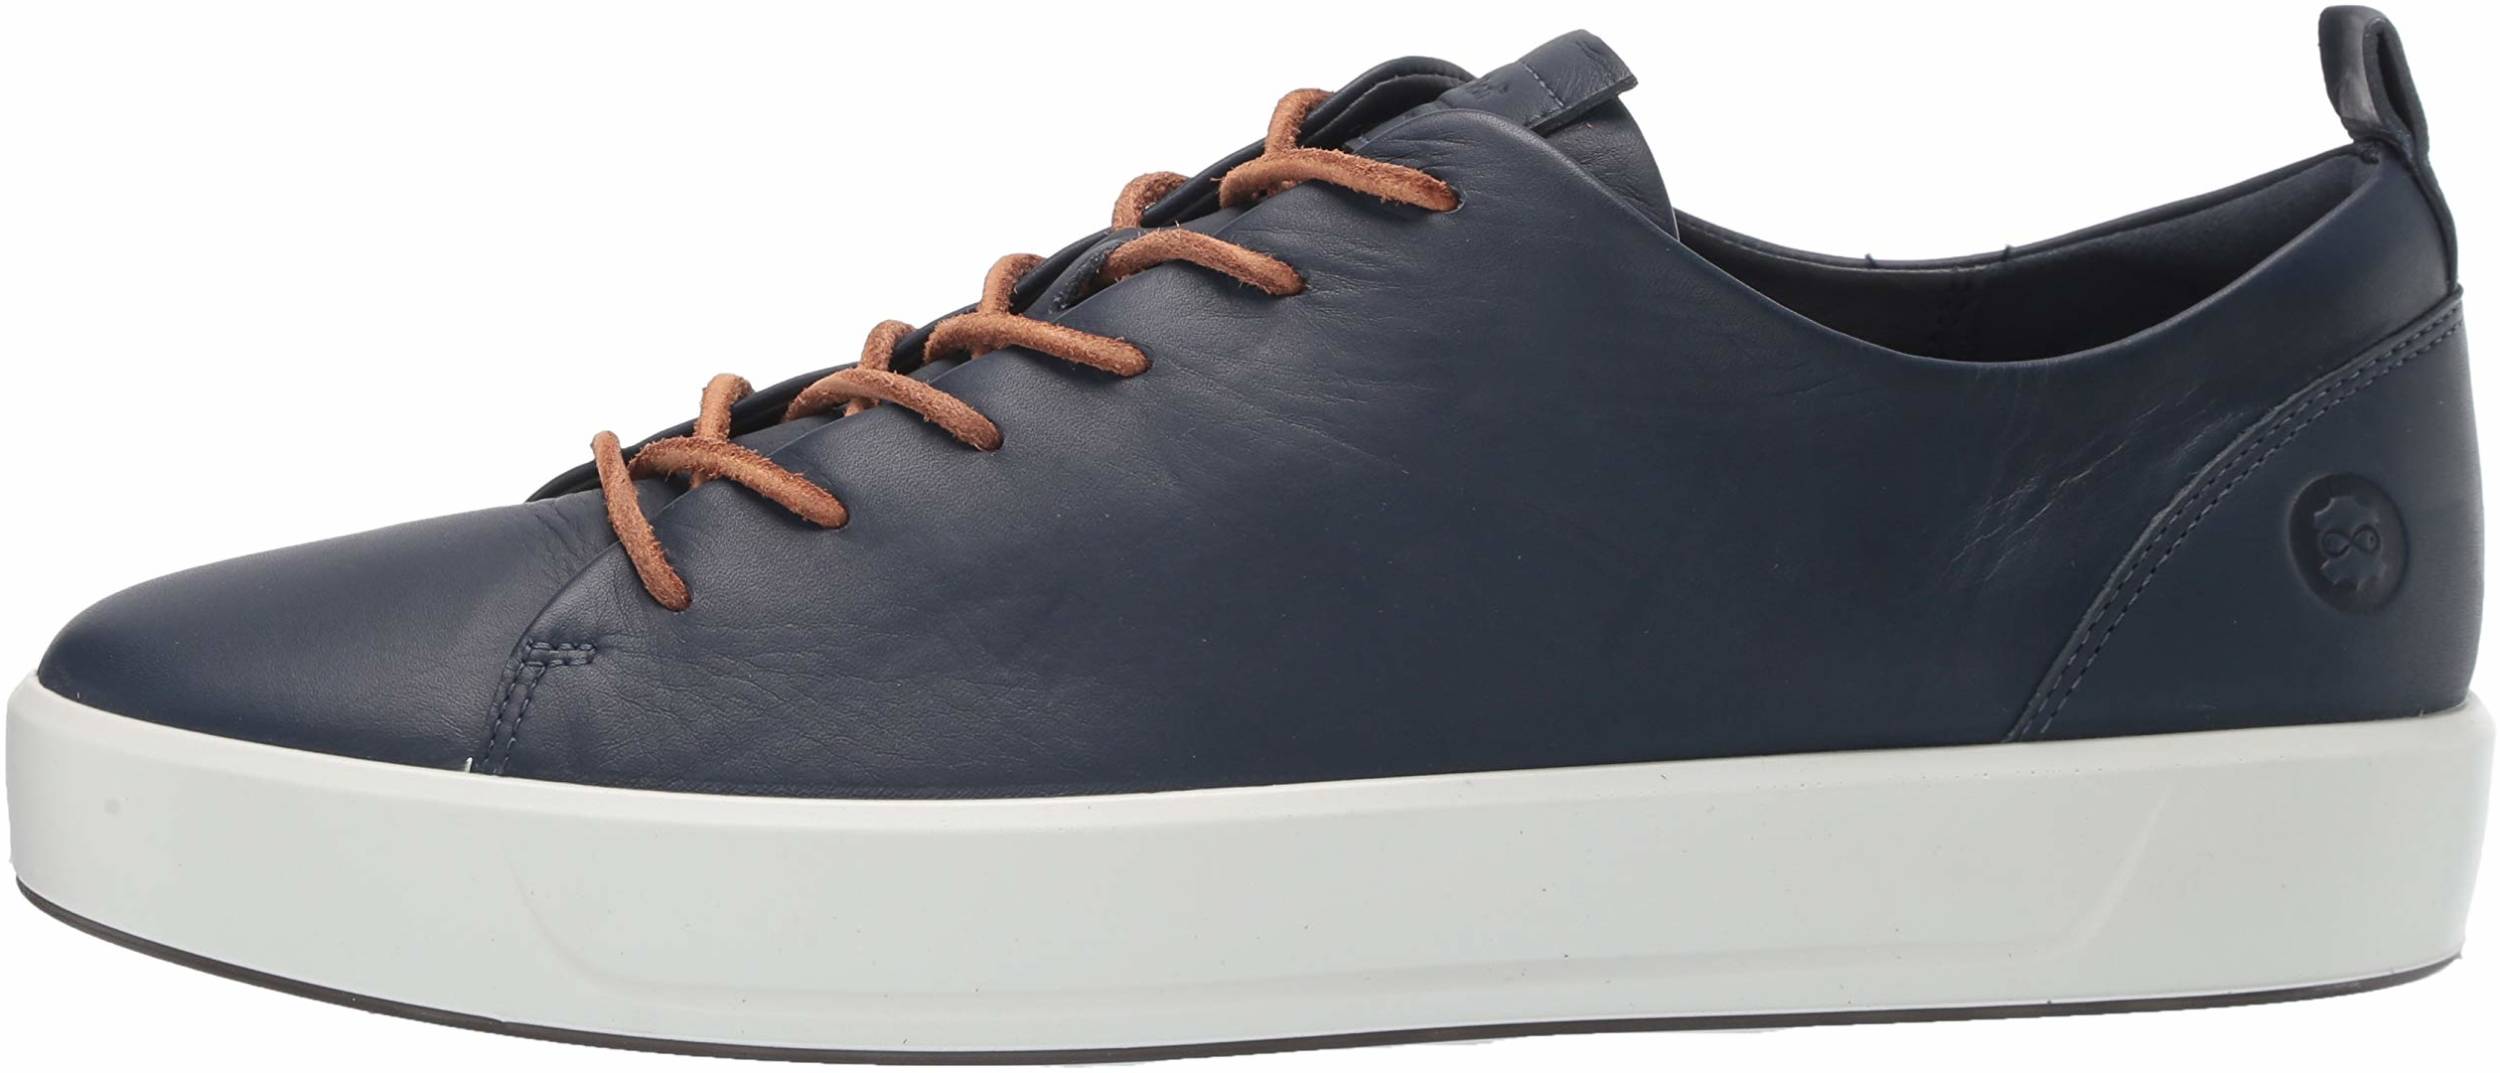 Ecco Soft 8 sneakers in 1 color (only $95) | RunRepeat